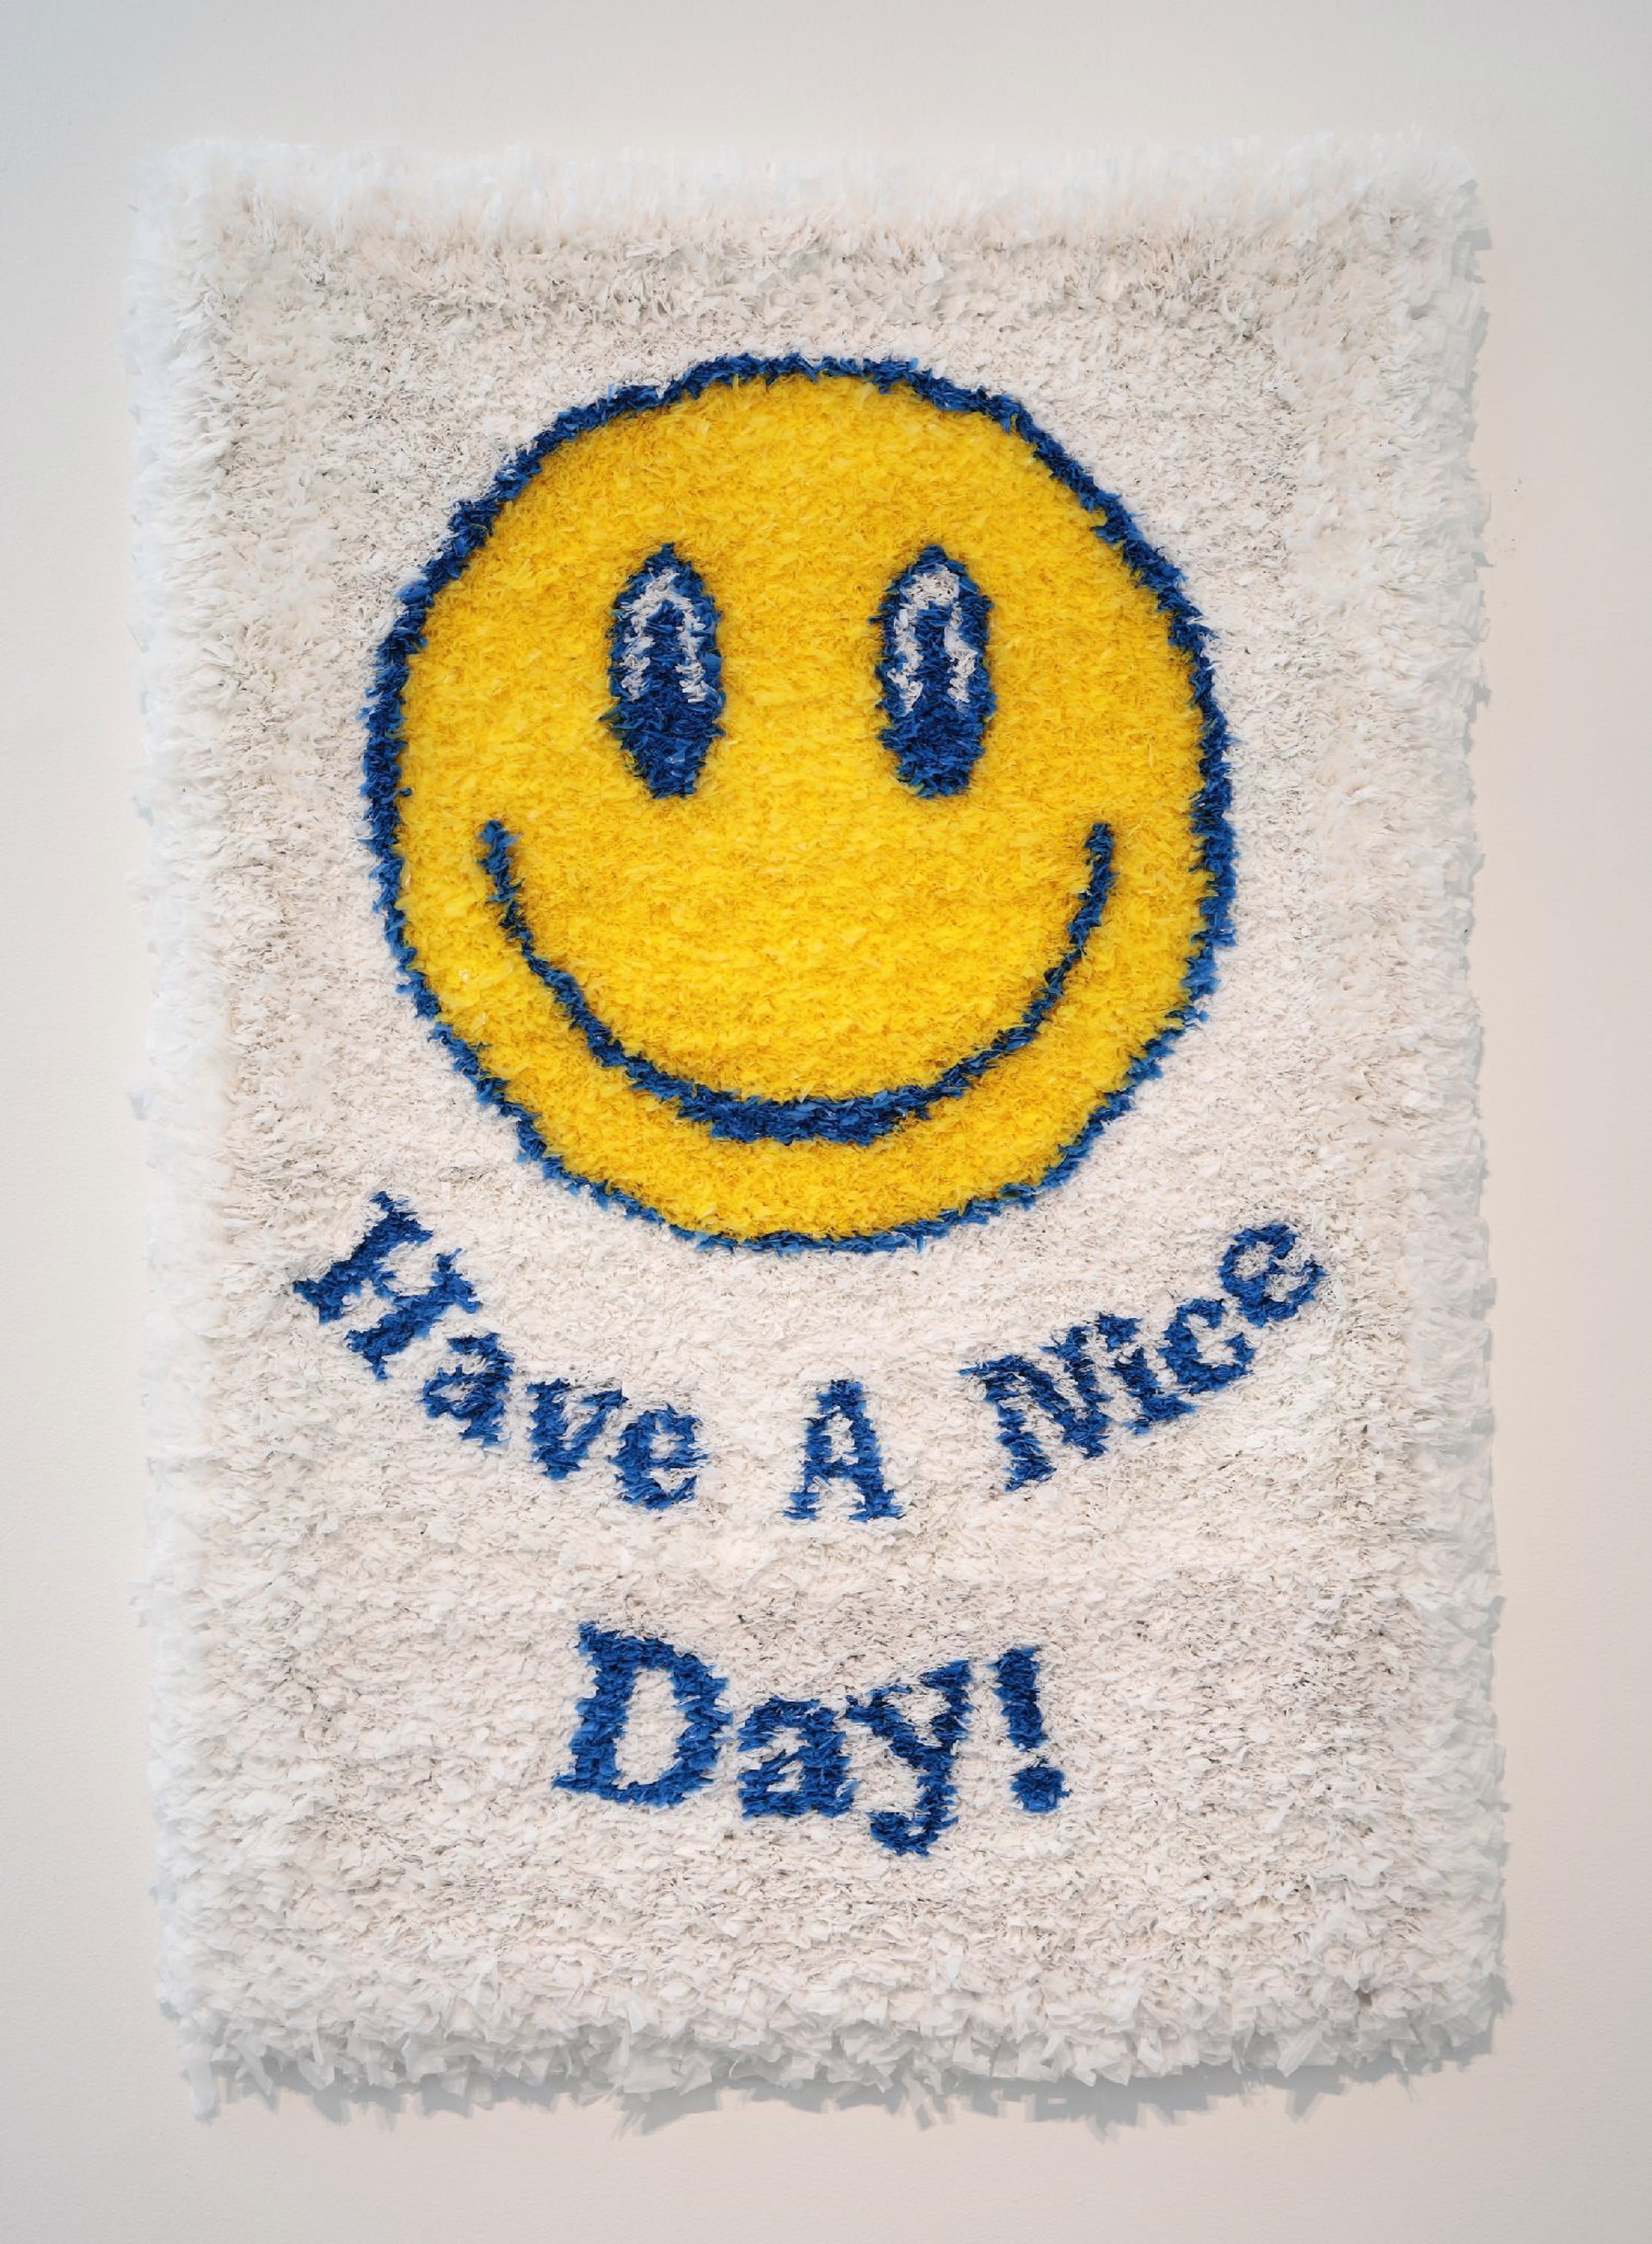 Please Recycle This Bag: Have A Nice Day by Susie Ganch